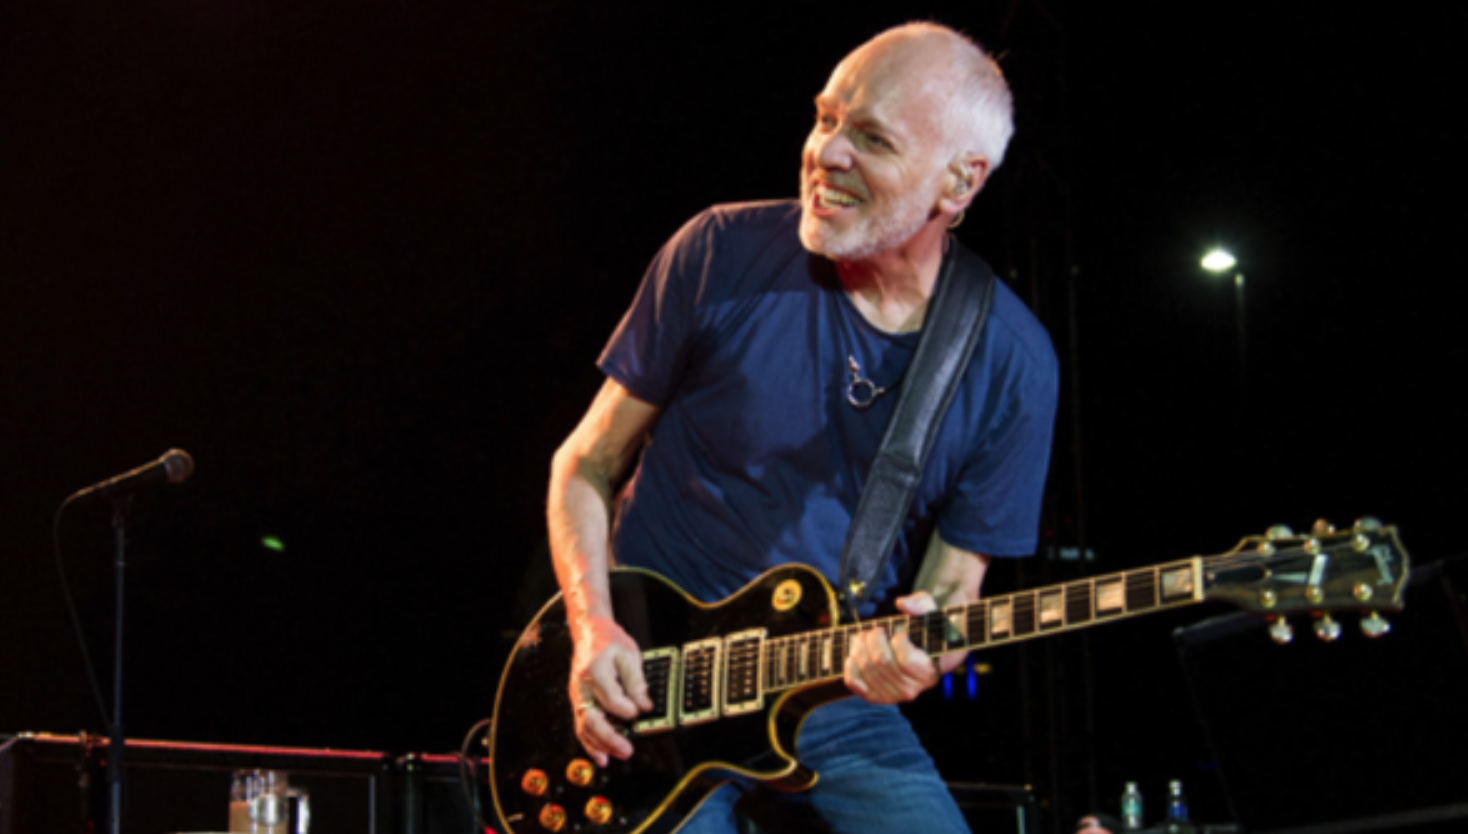 peter-frampton-photo-by-amy-harris-1-1372954-2448741-png